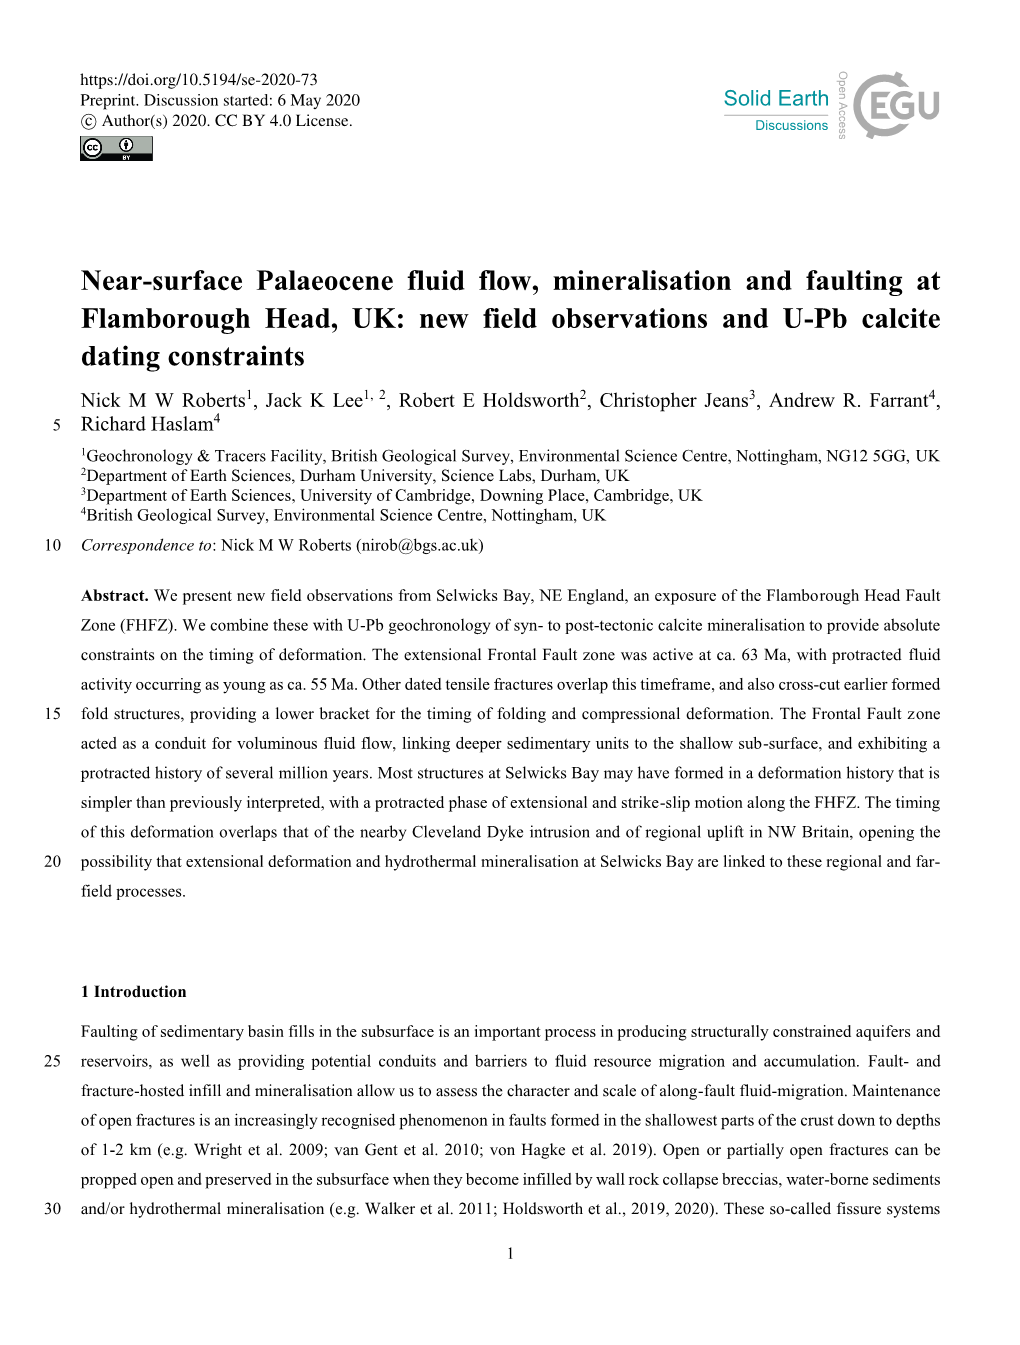 New Field Observations and U-Pb Calcite Dating Constraints Nick M W Roberts1, Jack K Lee1, 2, Robert E Holdsworth2, Christopher Jeans3, Andrew R